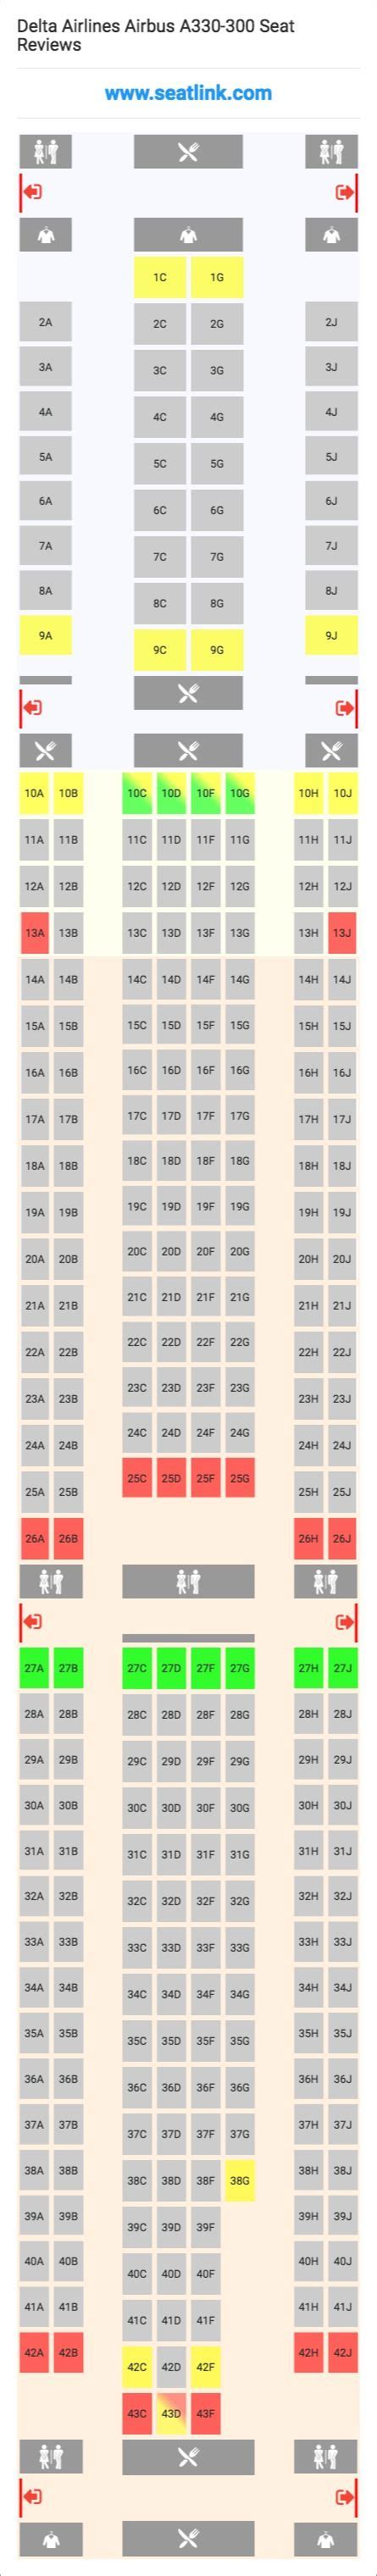 Delta Airlines Airbus A330 300 333 Seat Map Airlines Airbus